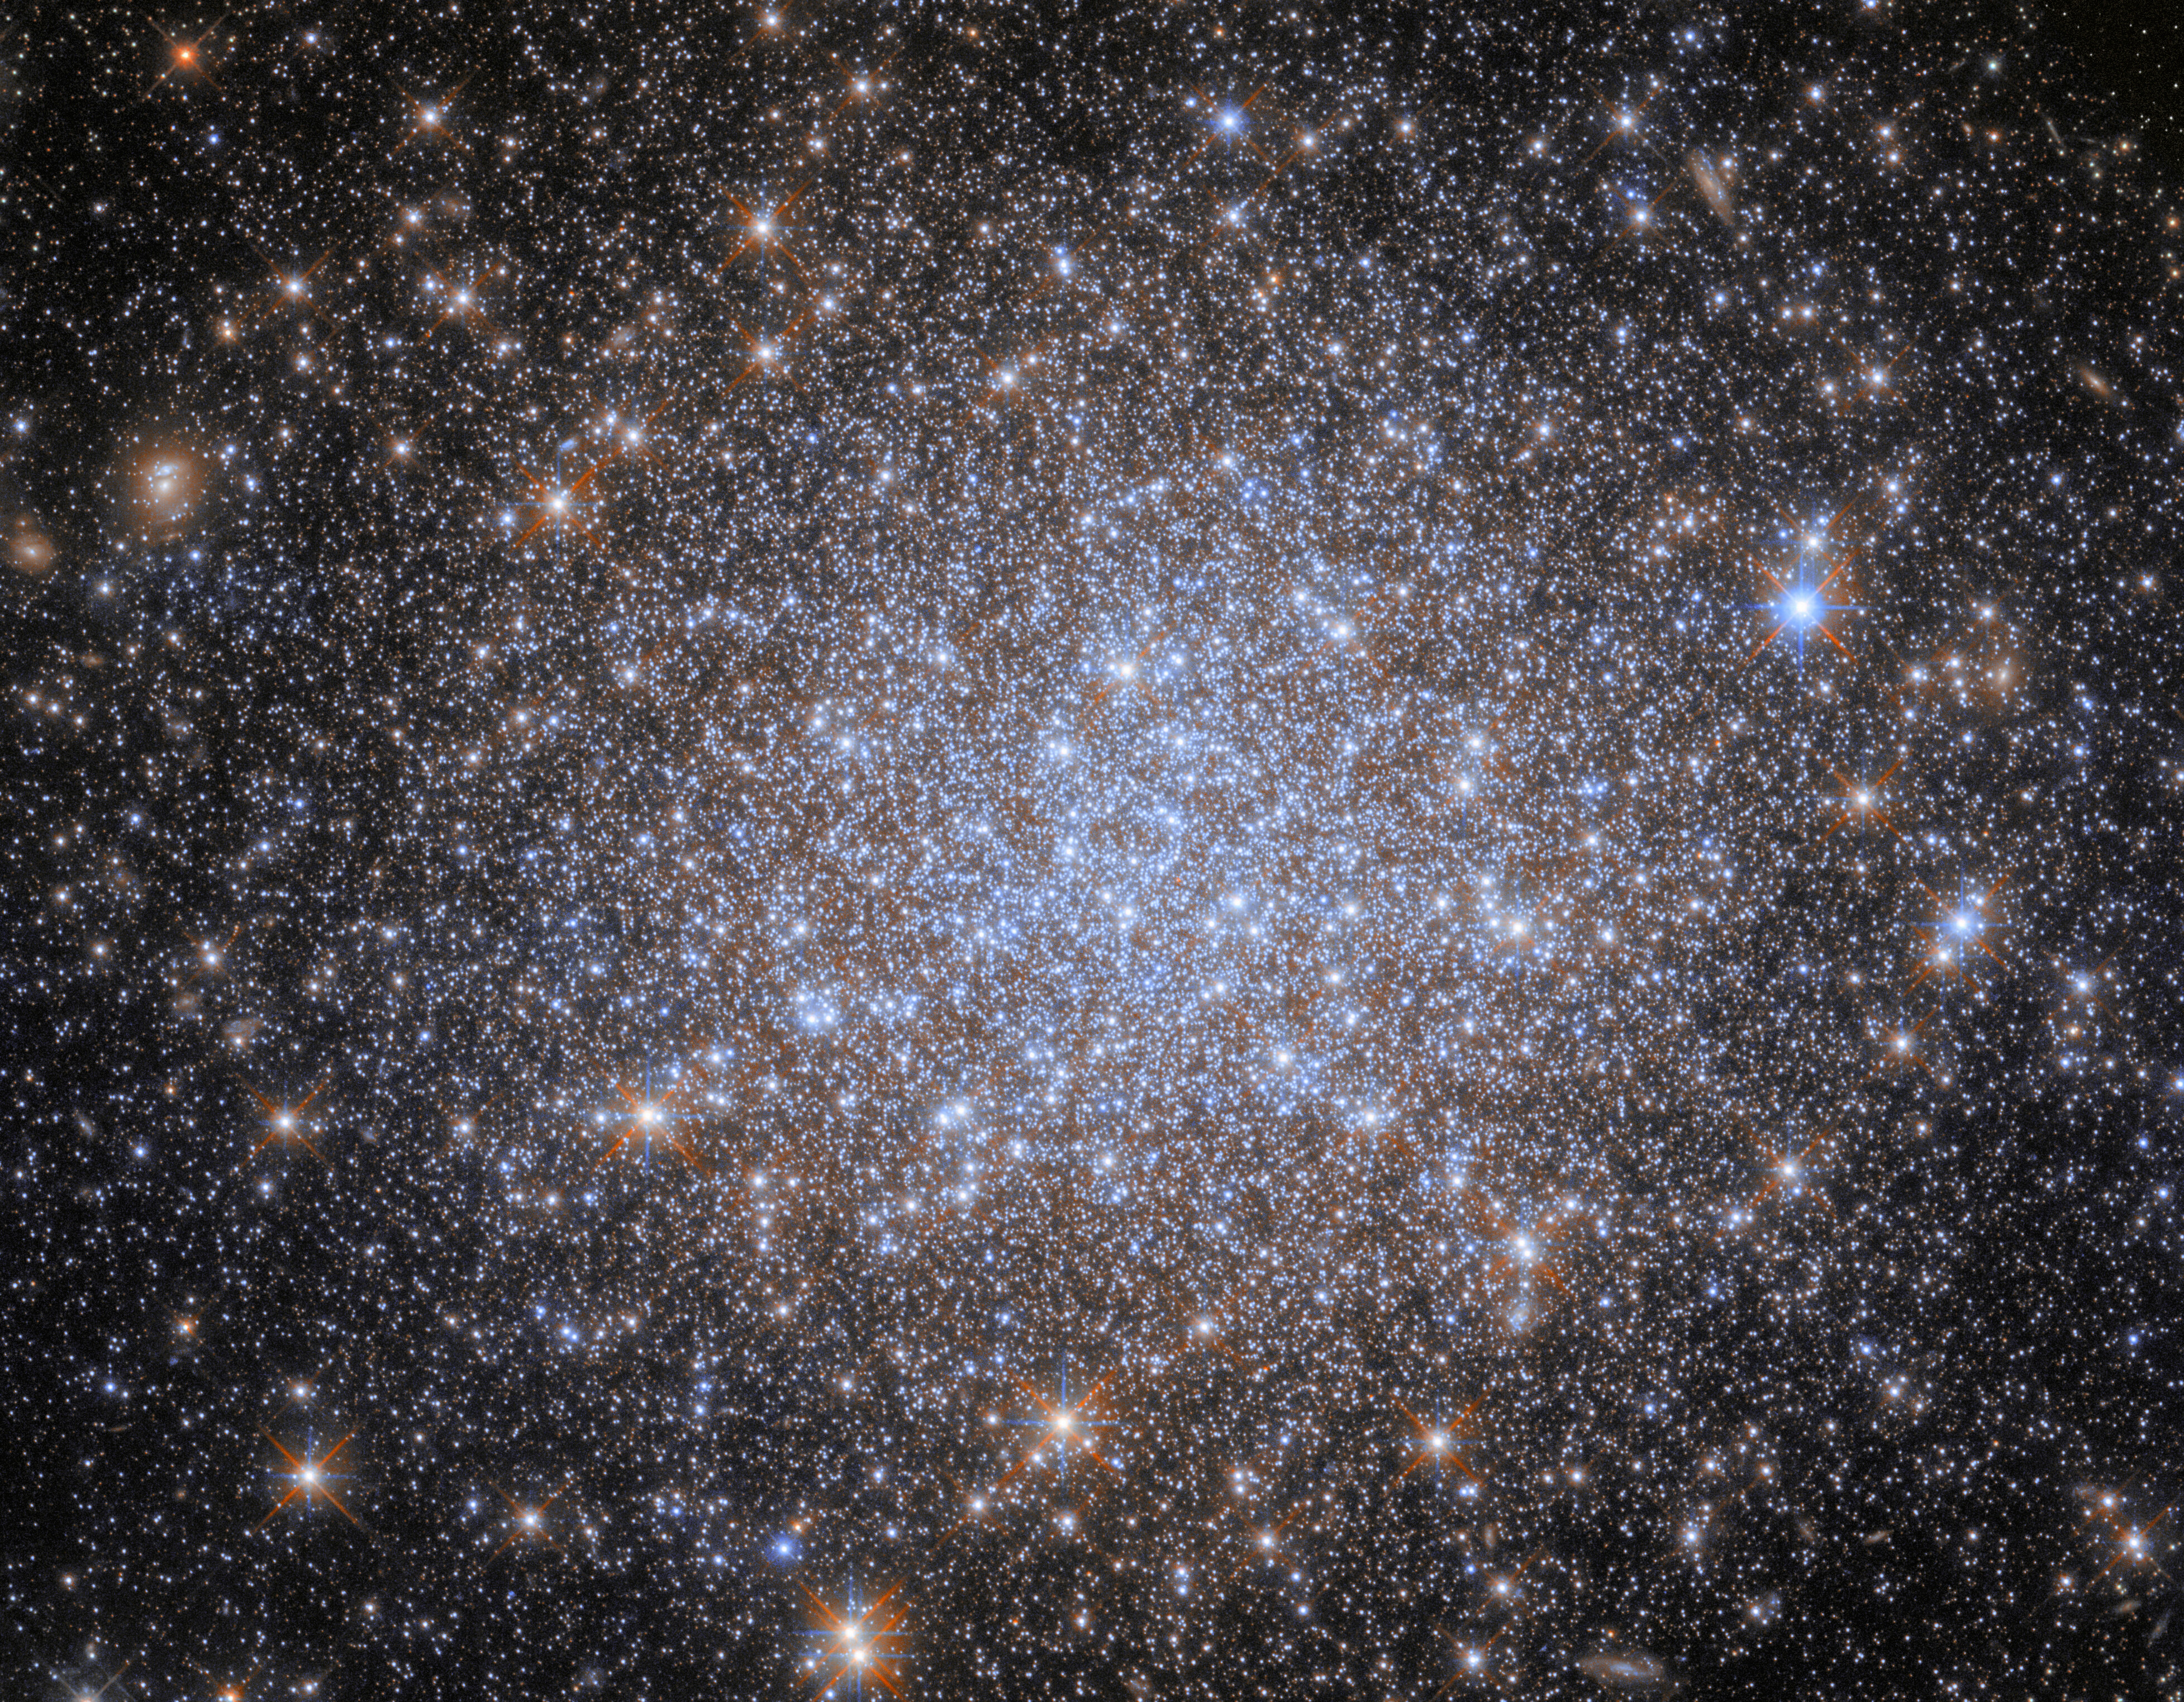 A cluster of stars. Most of the stars are very small and uniform in size, and they are notably bluish and cluster more densely together toward the center of the image. Some appear larger in the foreground. The stars give away to a dark background at the corners of the image.